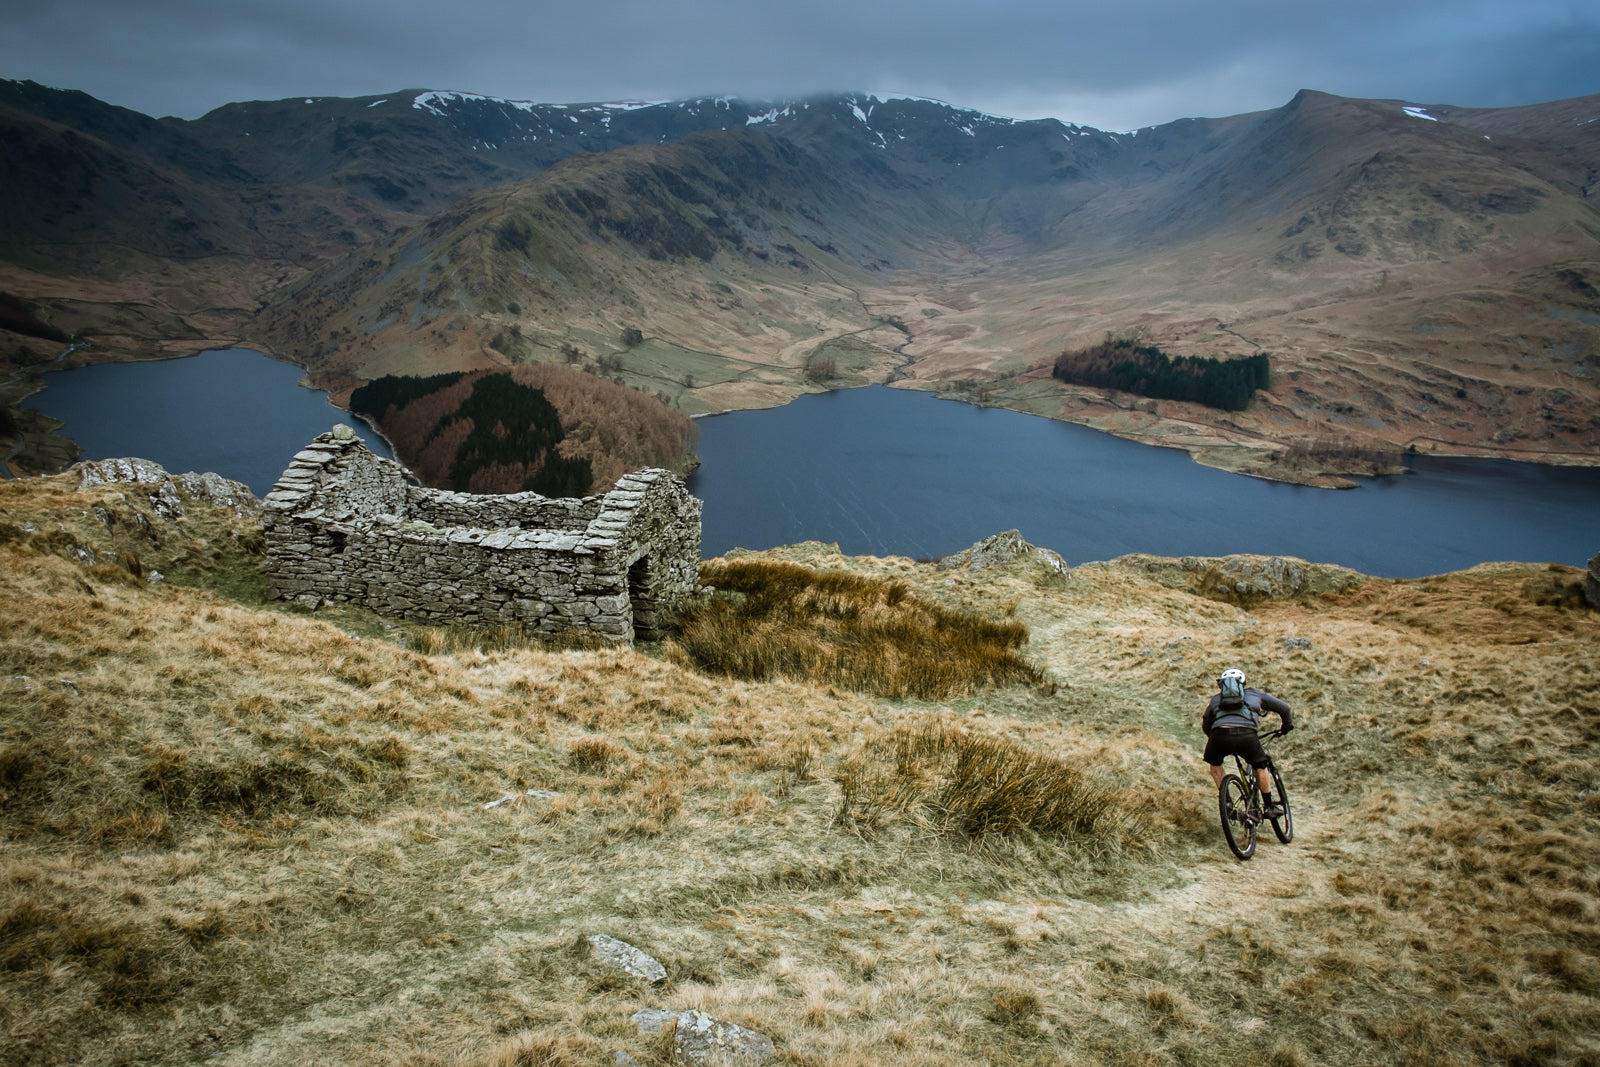 Mission Workshop Field Test : Riding Lake District. Spring 2014 - the English Lake District - Featuring Andy Waterman, Stif Cycles, Santa Cruz Bicycles, Sram.